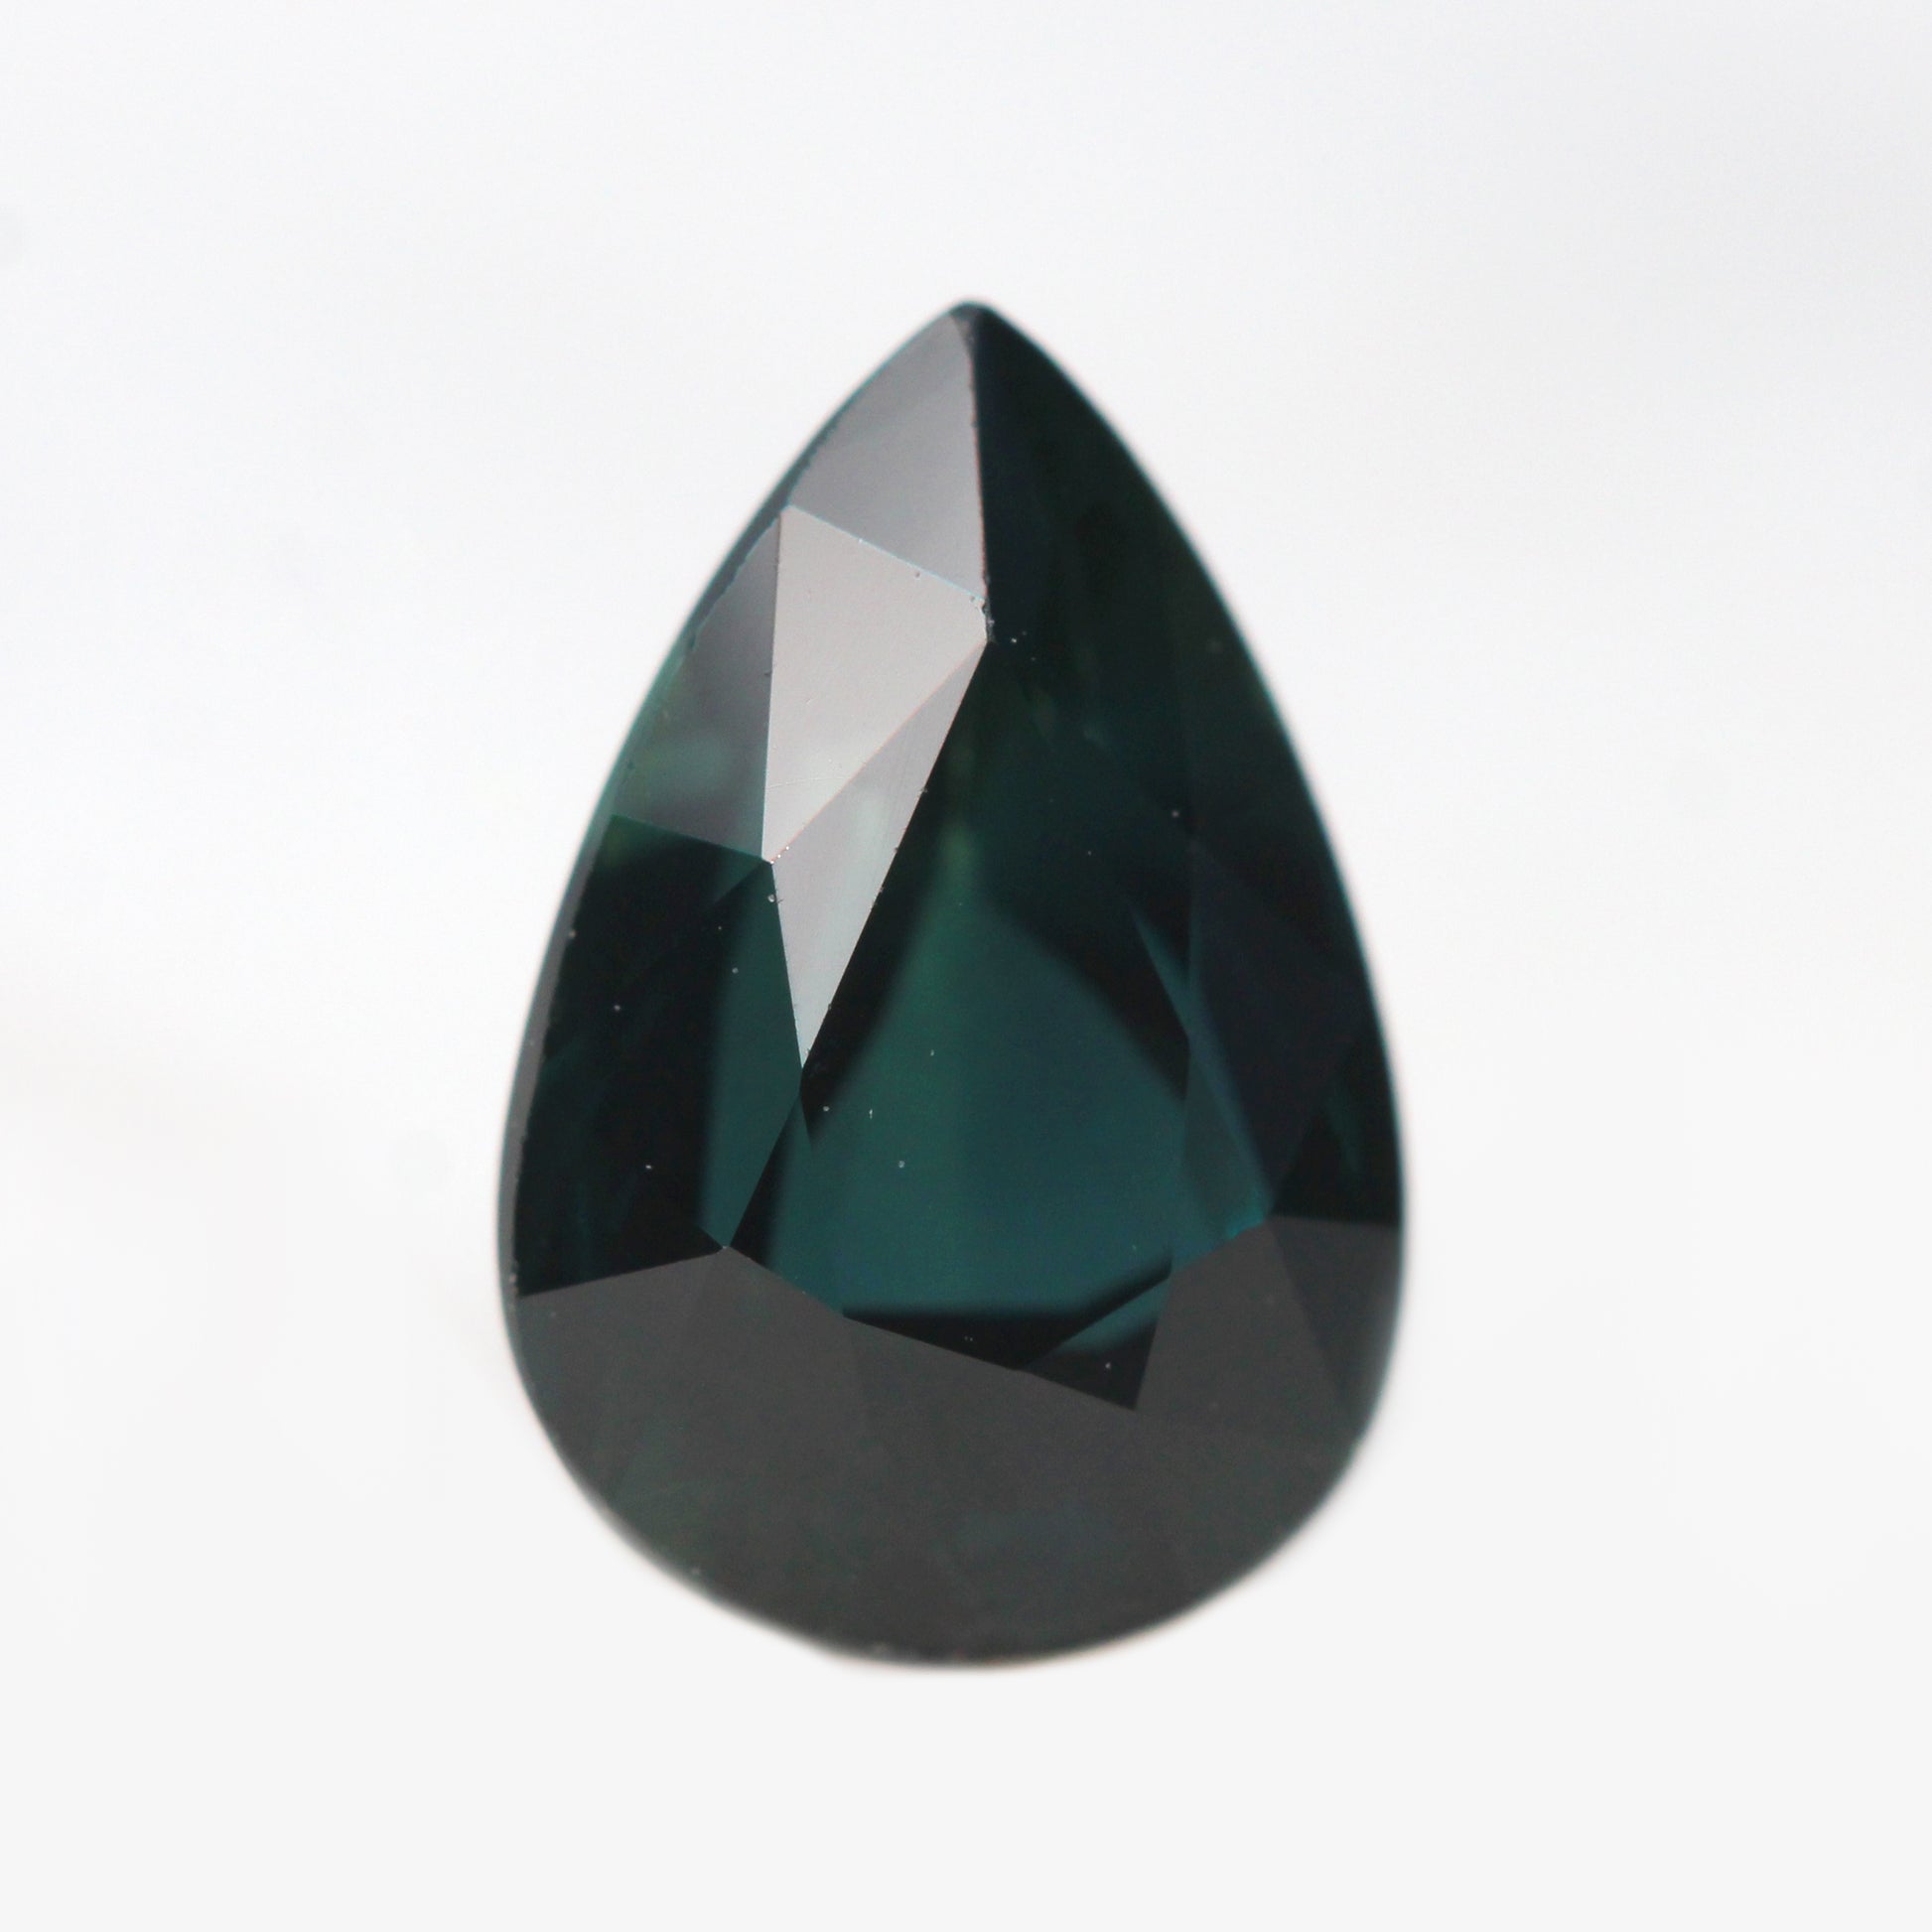 1.47 Carat Dark Teal Pear Australian Sapphire for Custom Work - Inventory Code TPS147 - Midwinter Co. Alternative Bridal Rings and Modern Fine Jewelry